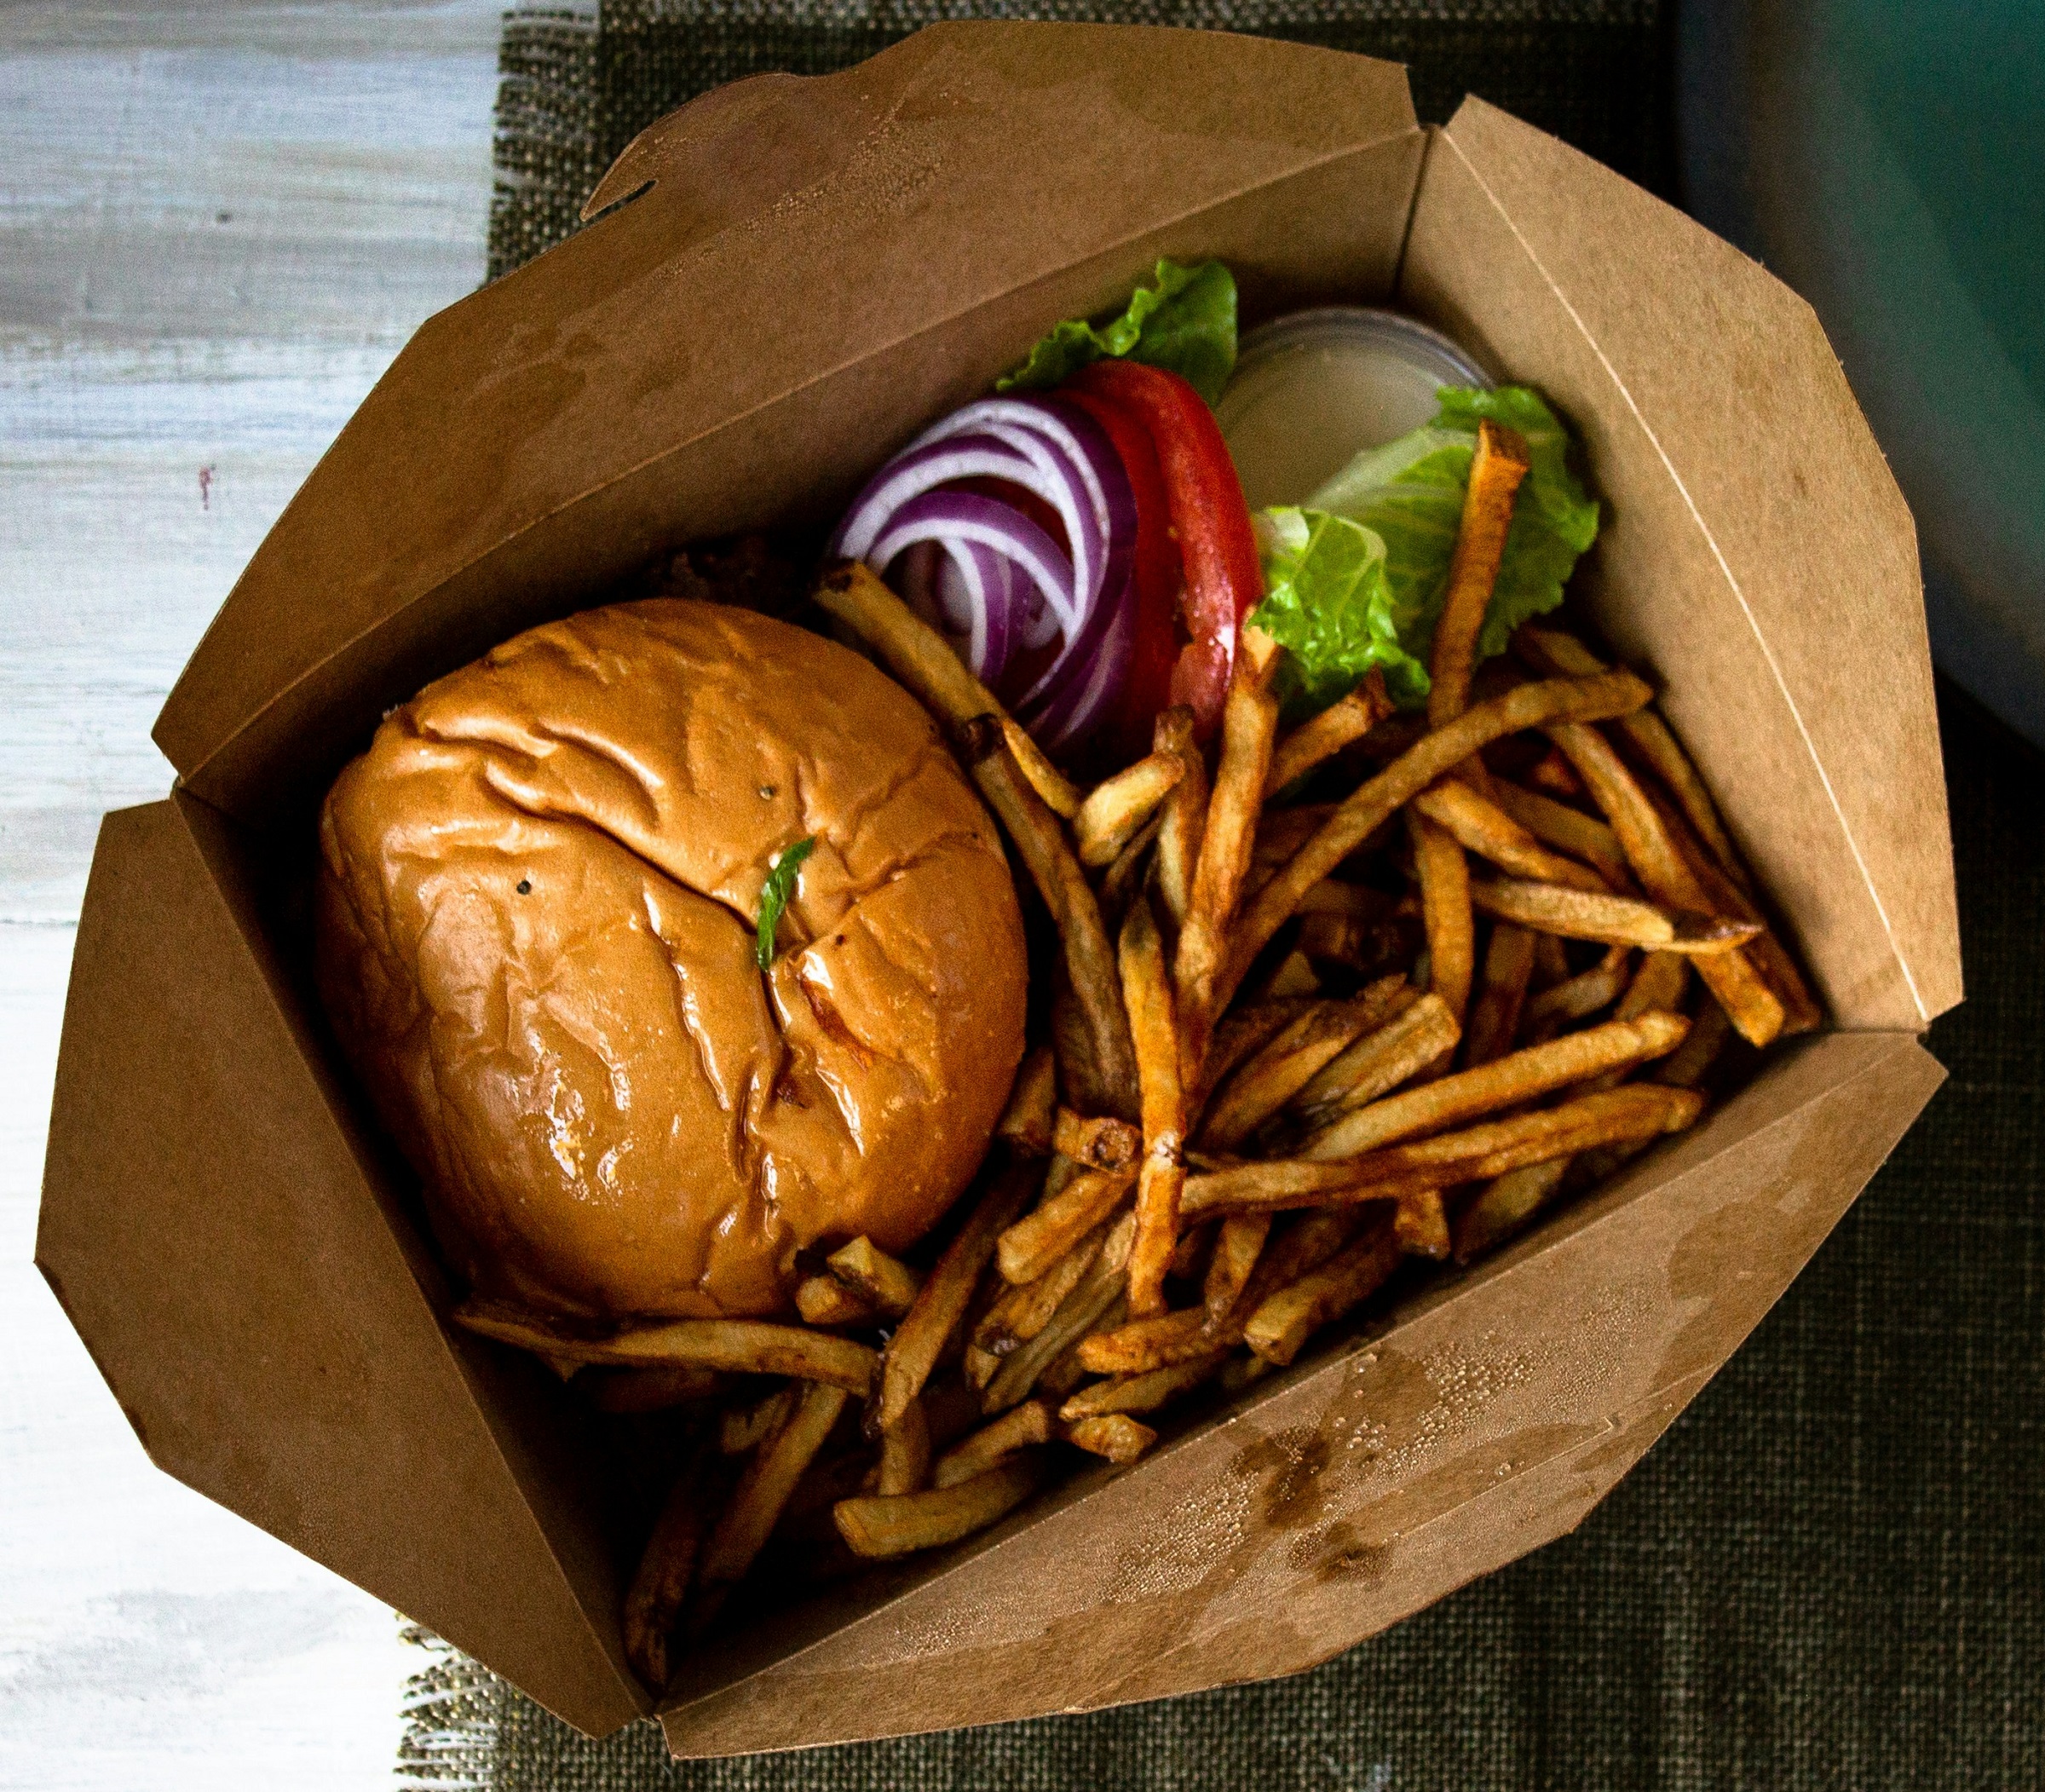 A burger and fries in a takeout box.